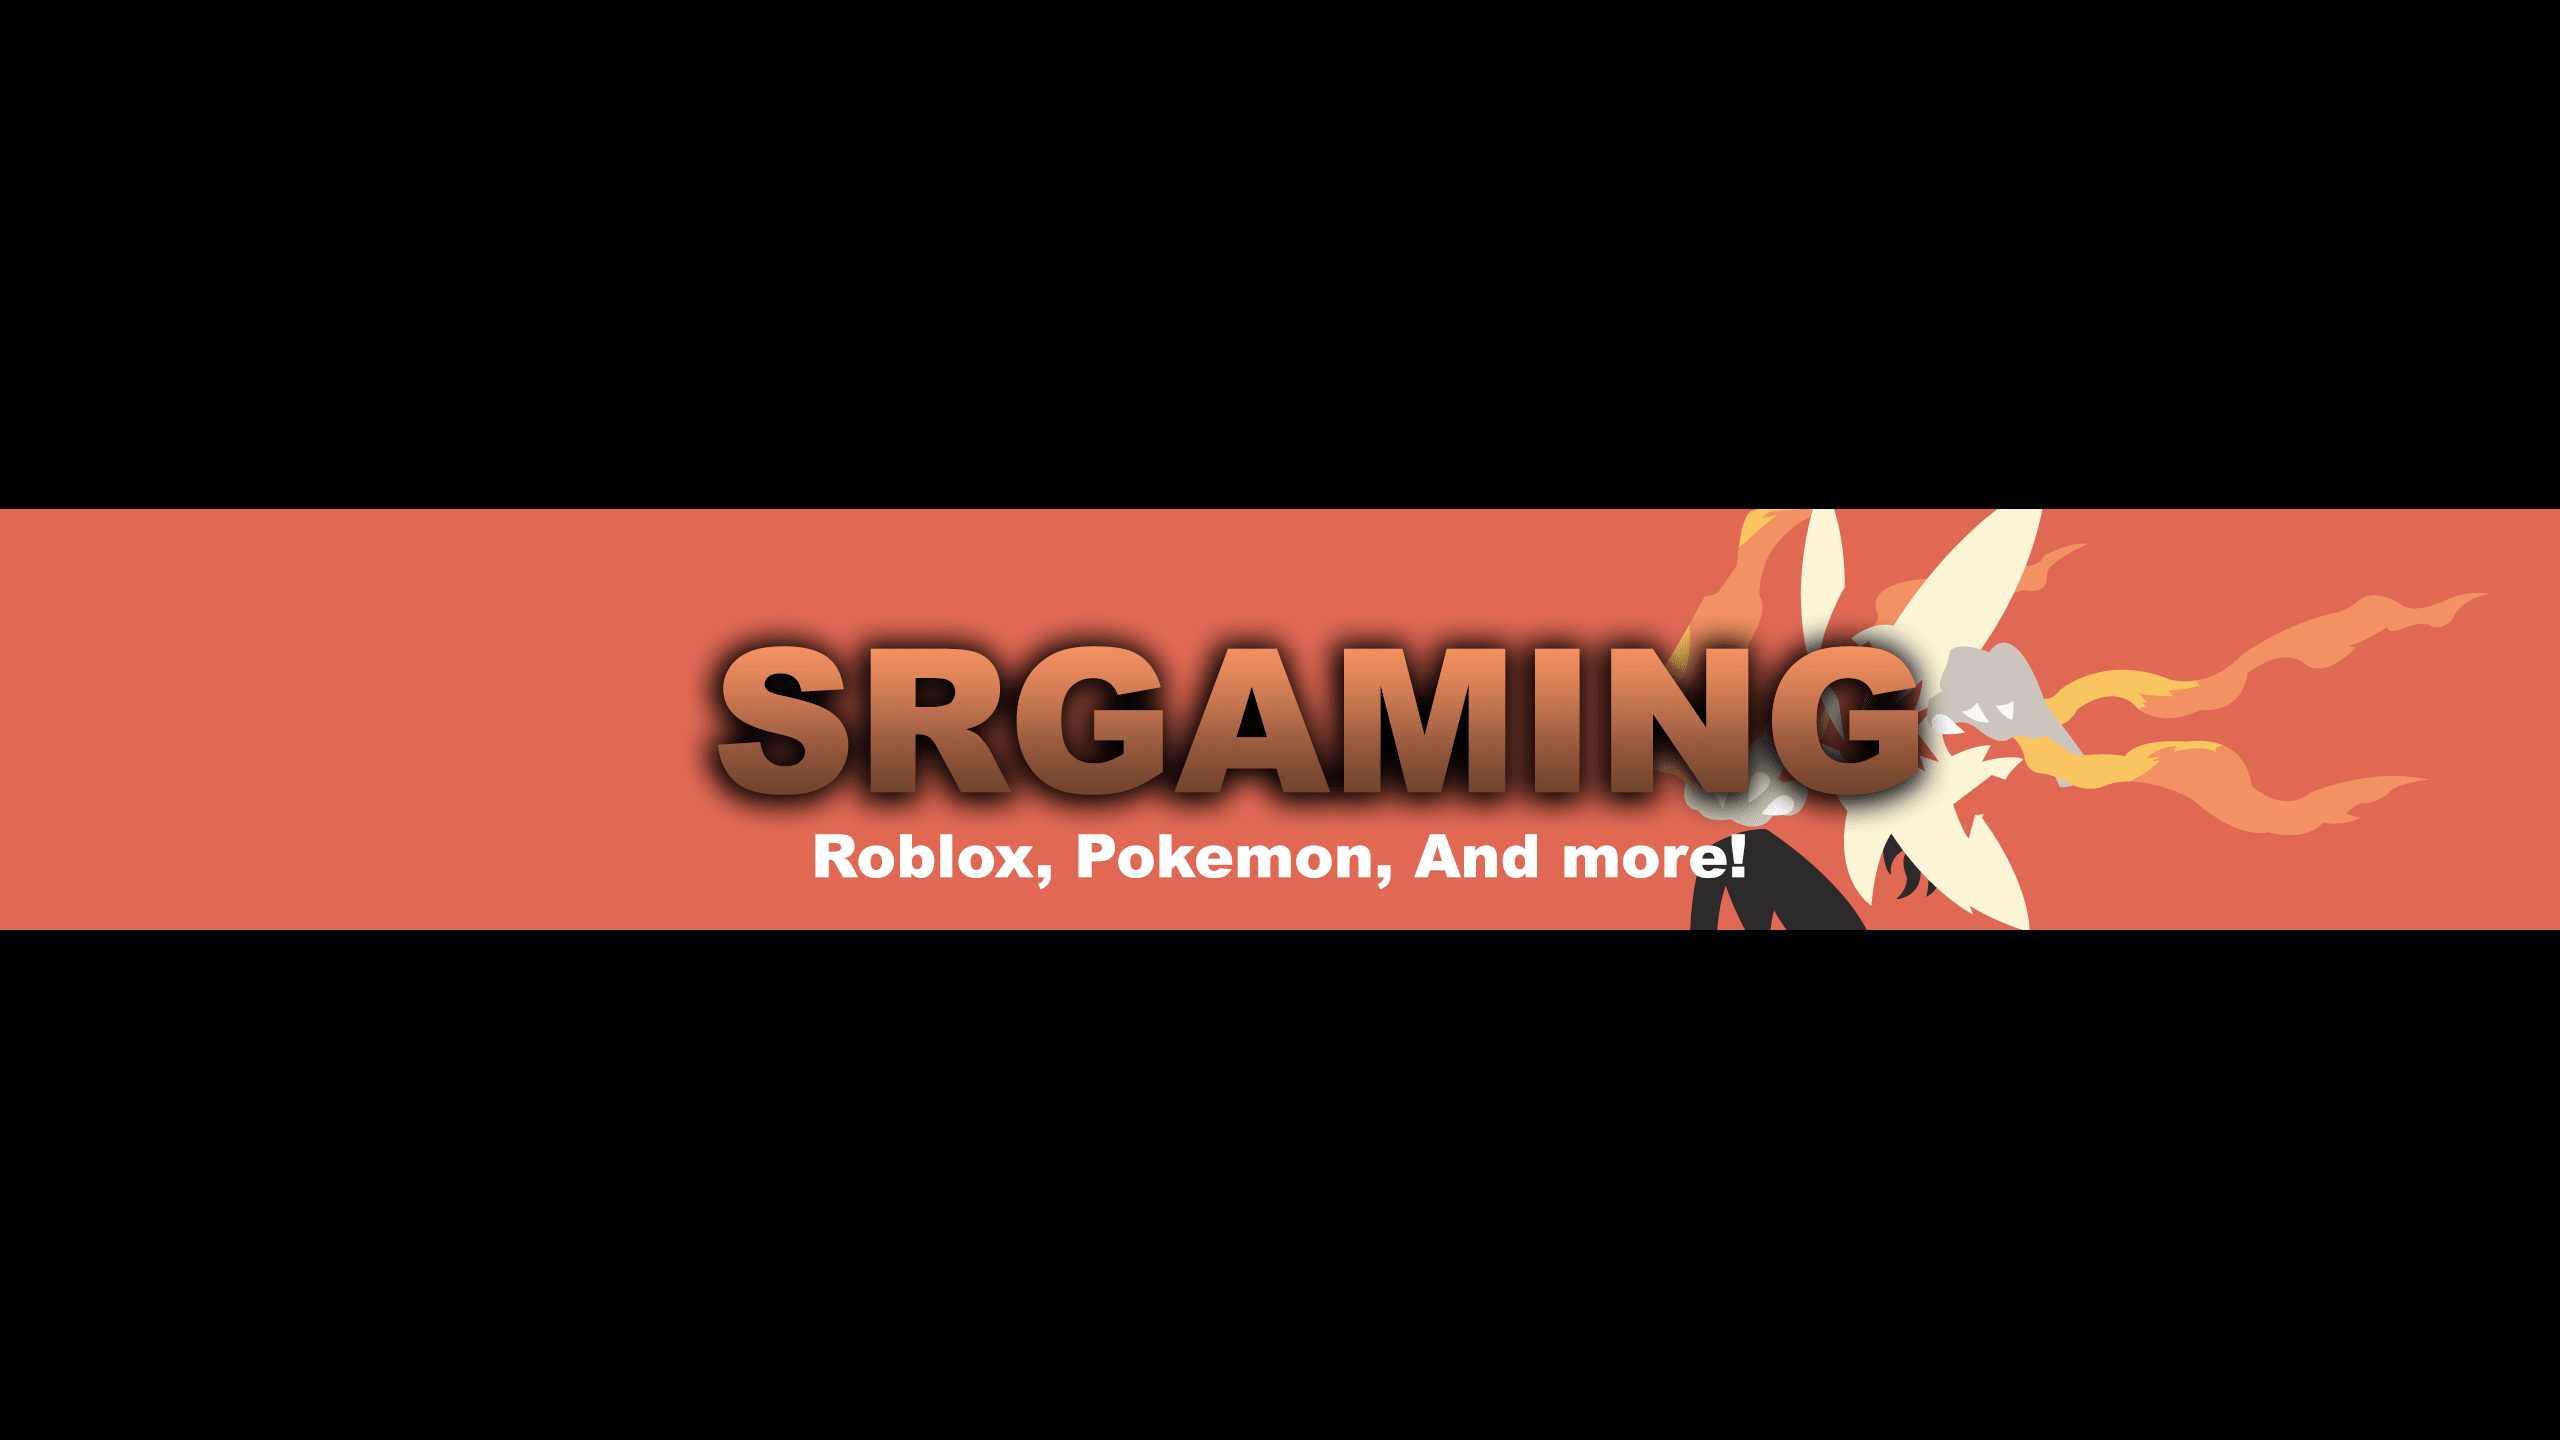 Design You A Channel Banner And Matching Avatar By Bluephonix2